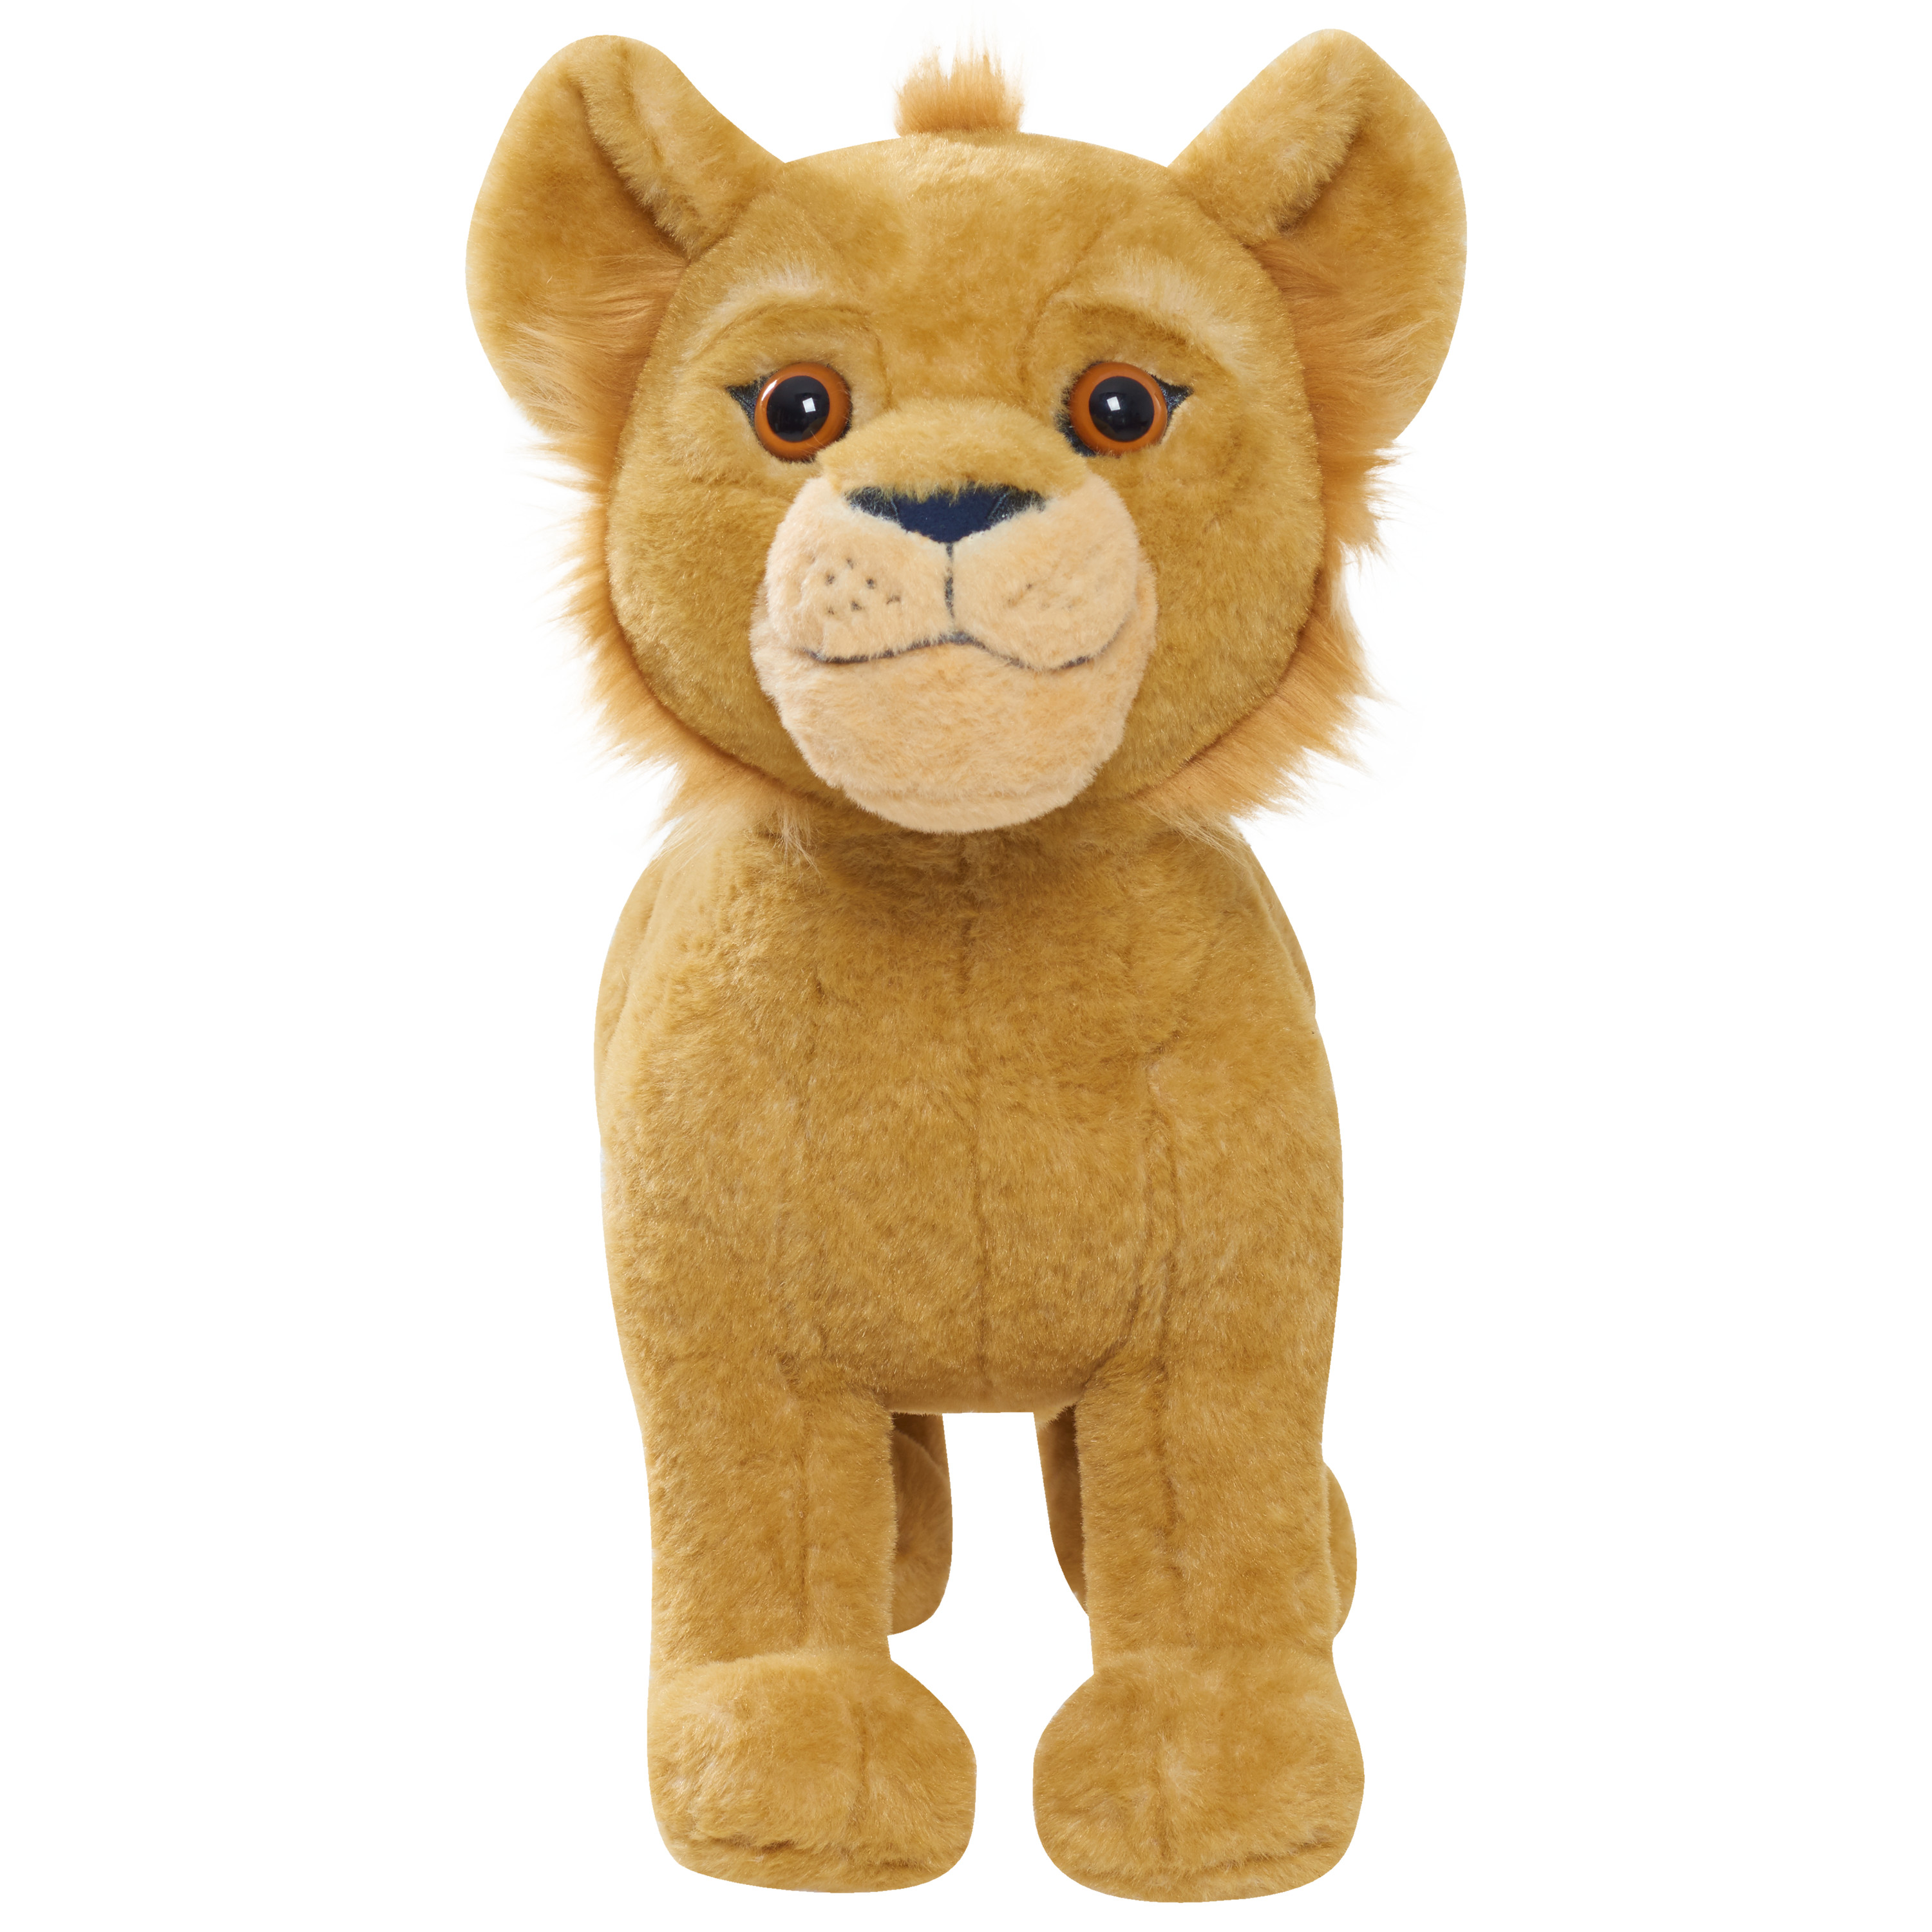 Disney's The Lion King Large Plush Simba, Stuffed Animal, Lion, Officially Licensed Kids Toys for Ages 3 Up, Gifts and Presents - image 1 of 4